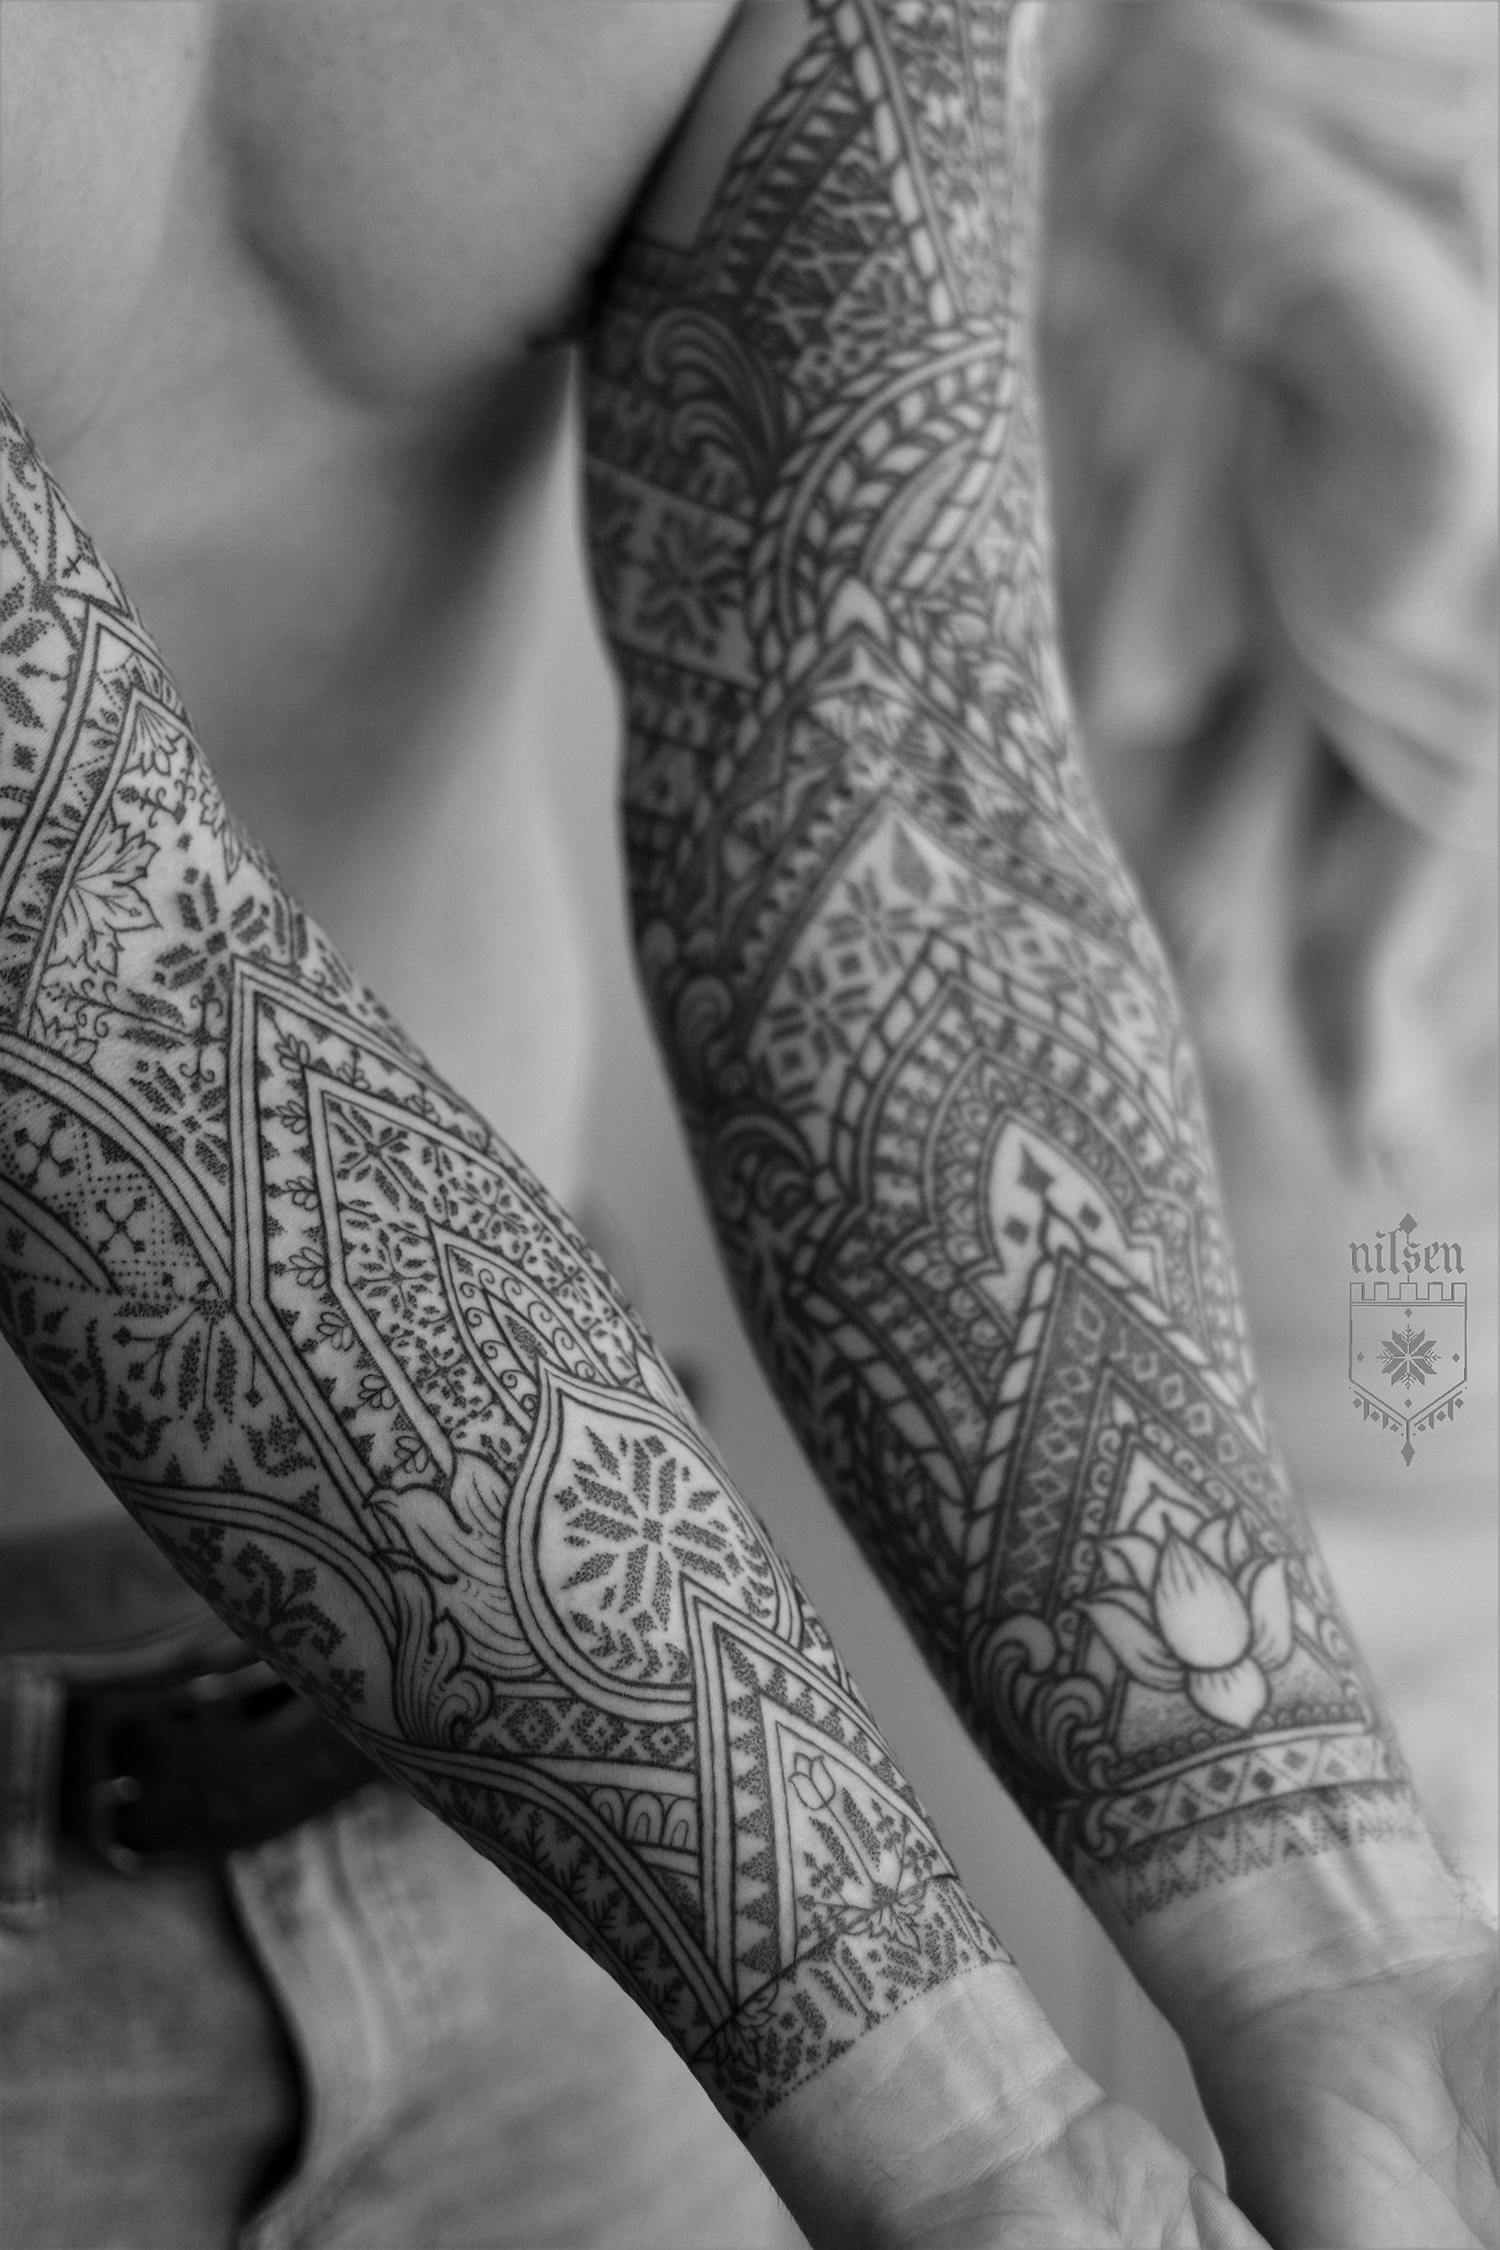 Occasionally, his intricate geometric tattoos mimic cathedral windows and old architectural embellishments.